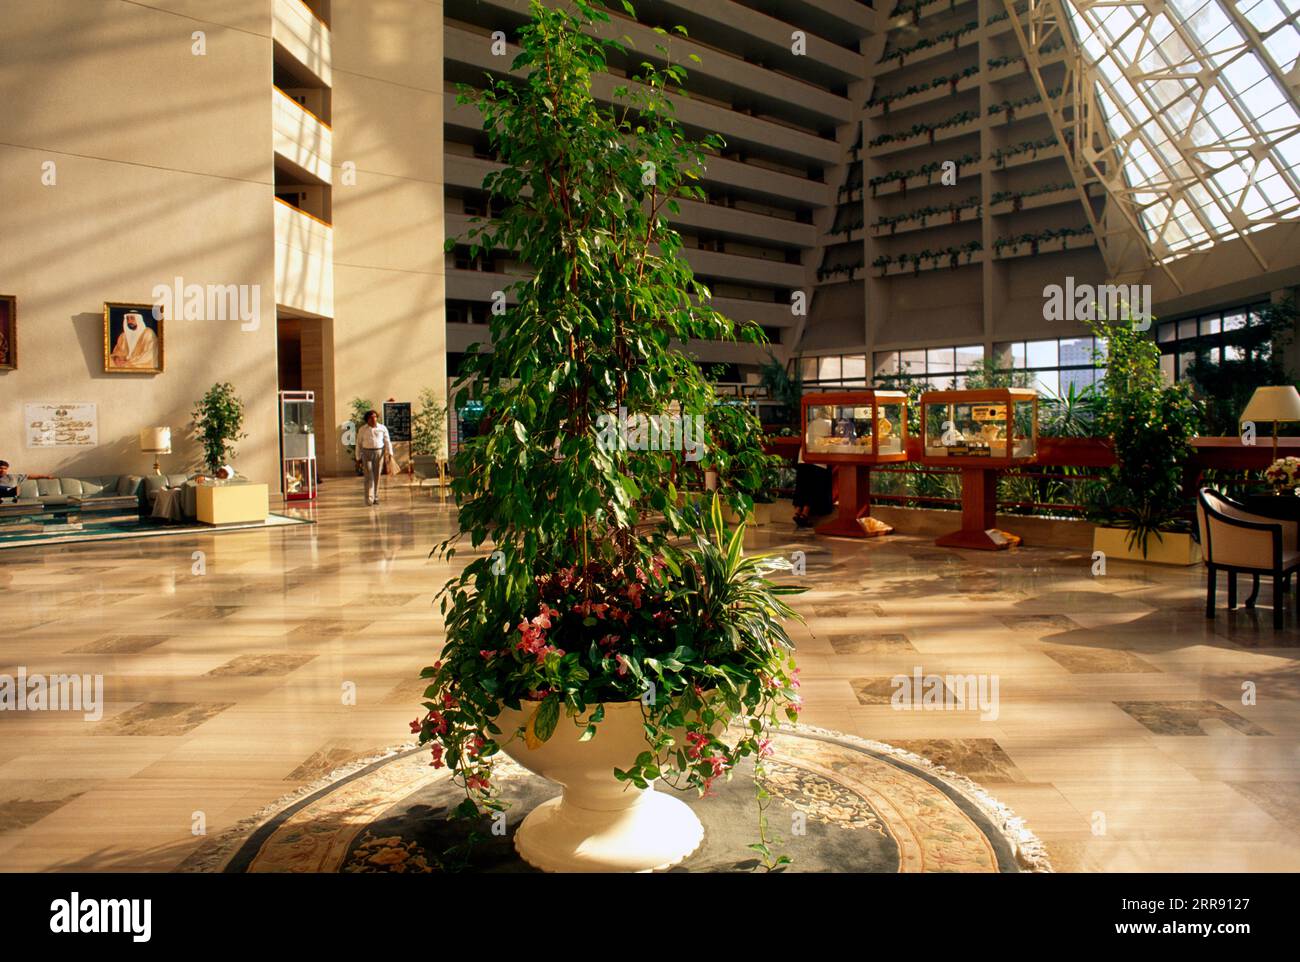 Sharjah UAE Plant in the Middle of Continental Hotel Foyer. Stock Photo